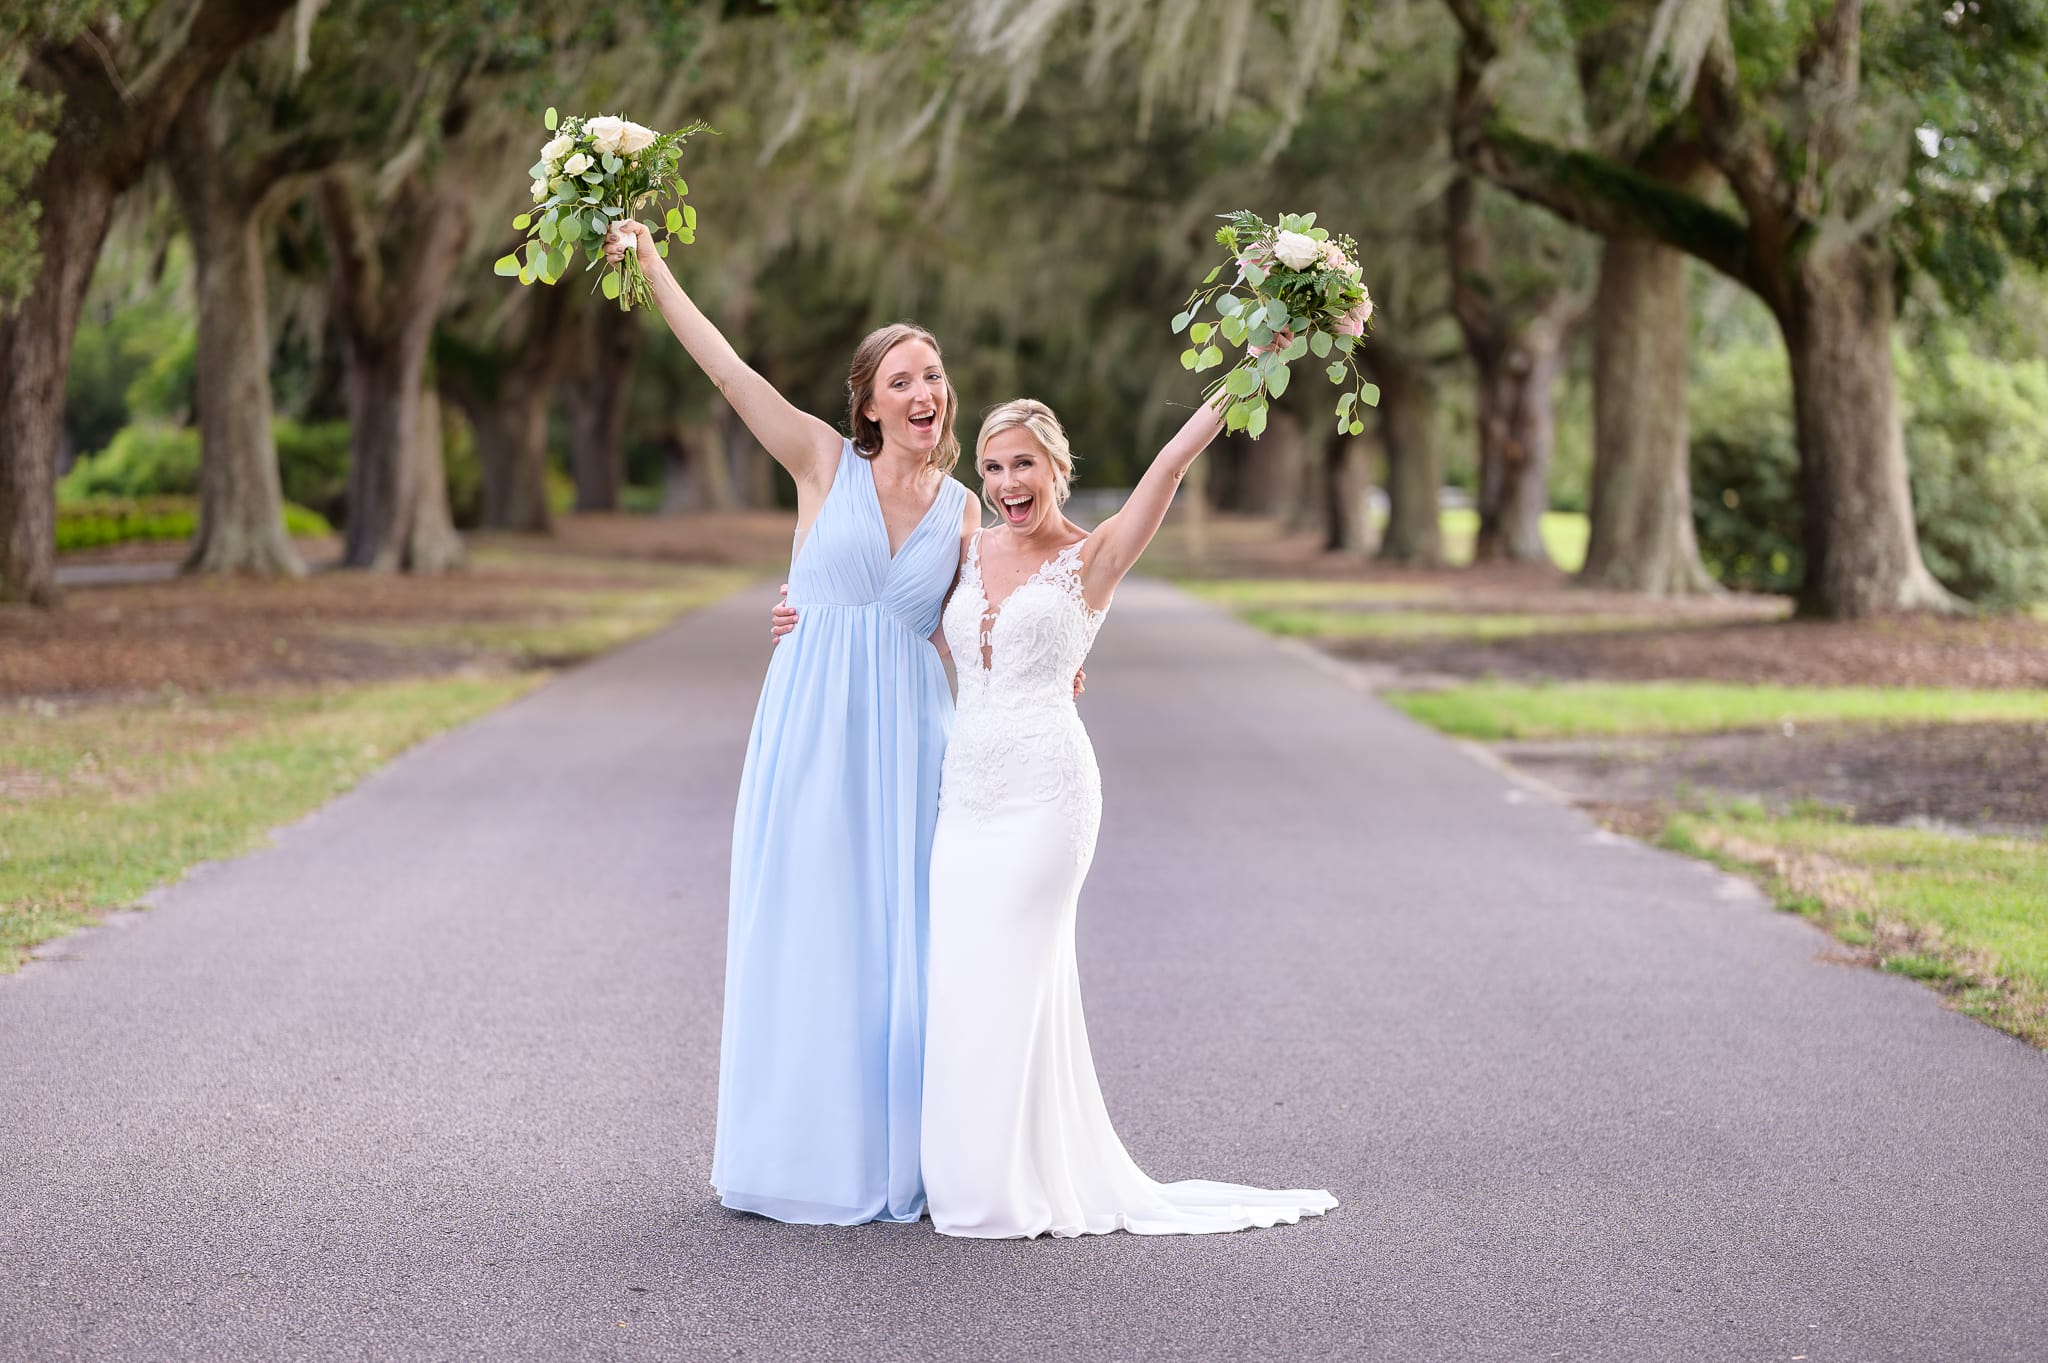 Bride and maid of honor holding flowers in the air - Caledonia Golf & Fish Club